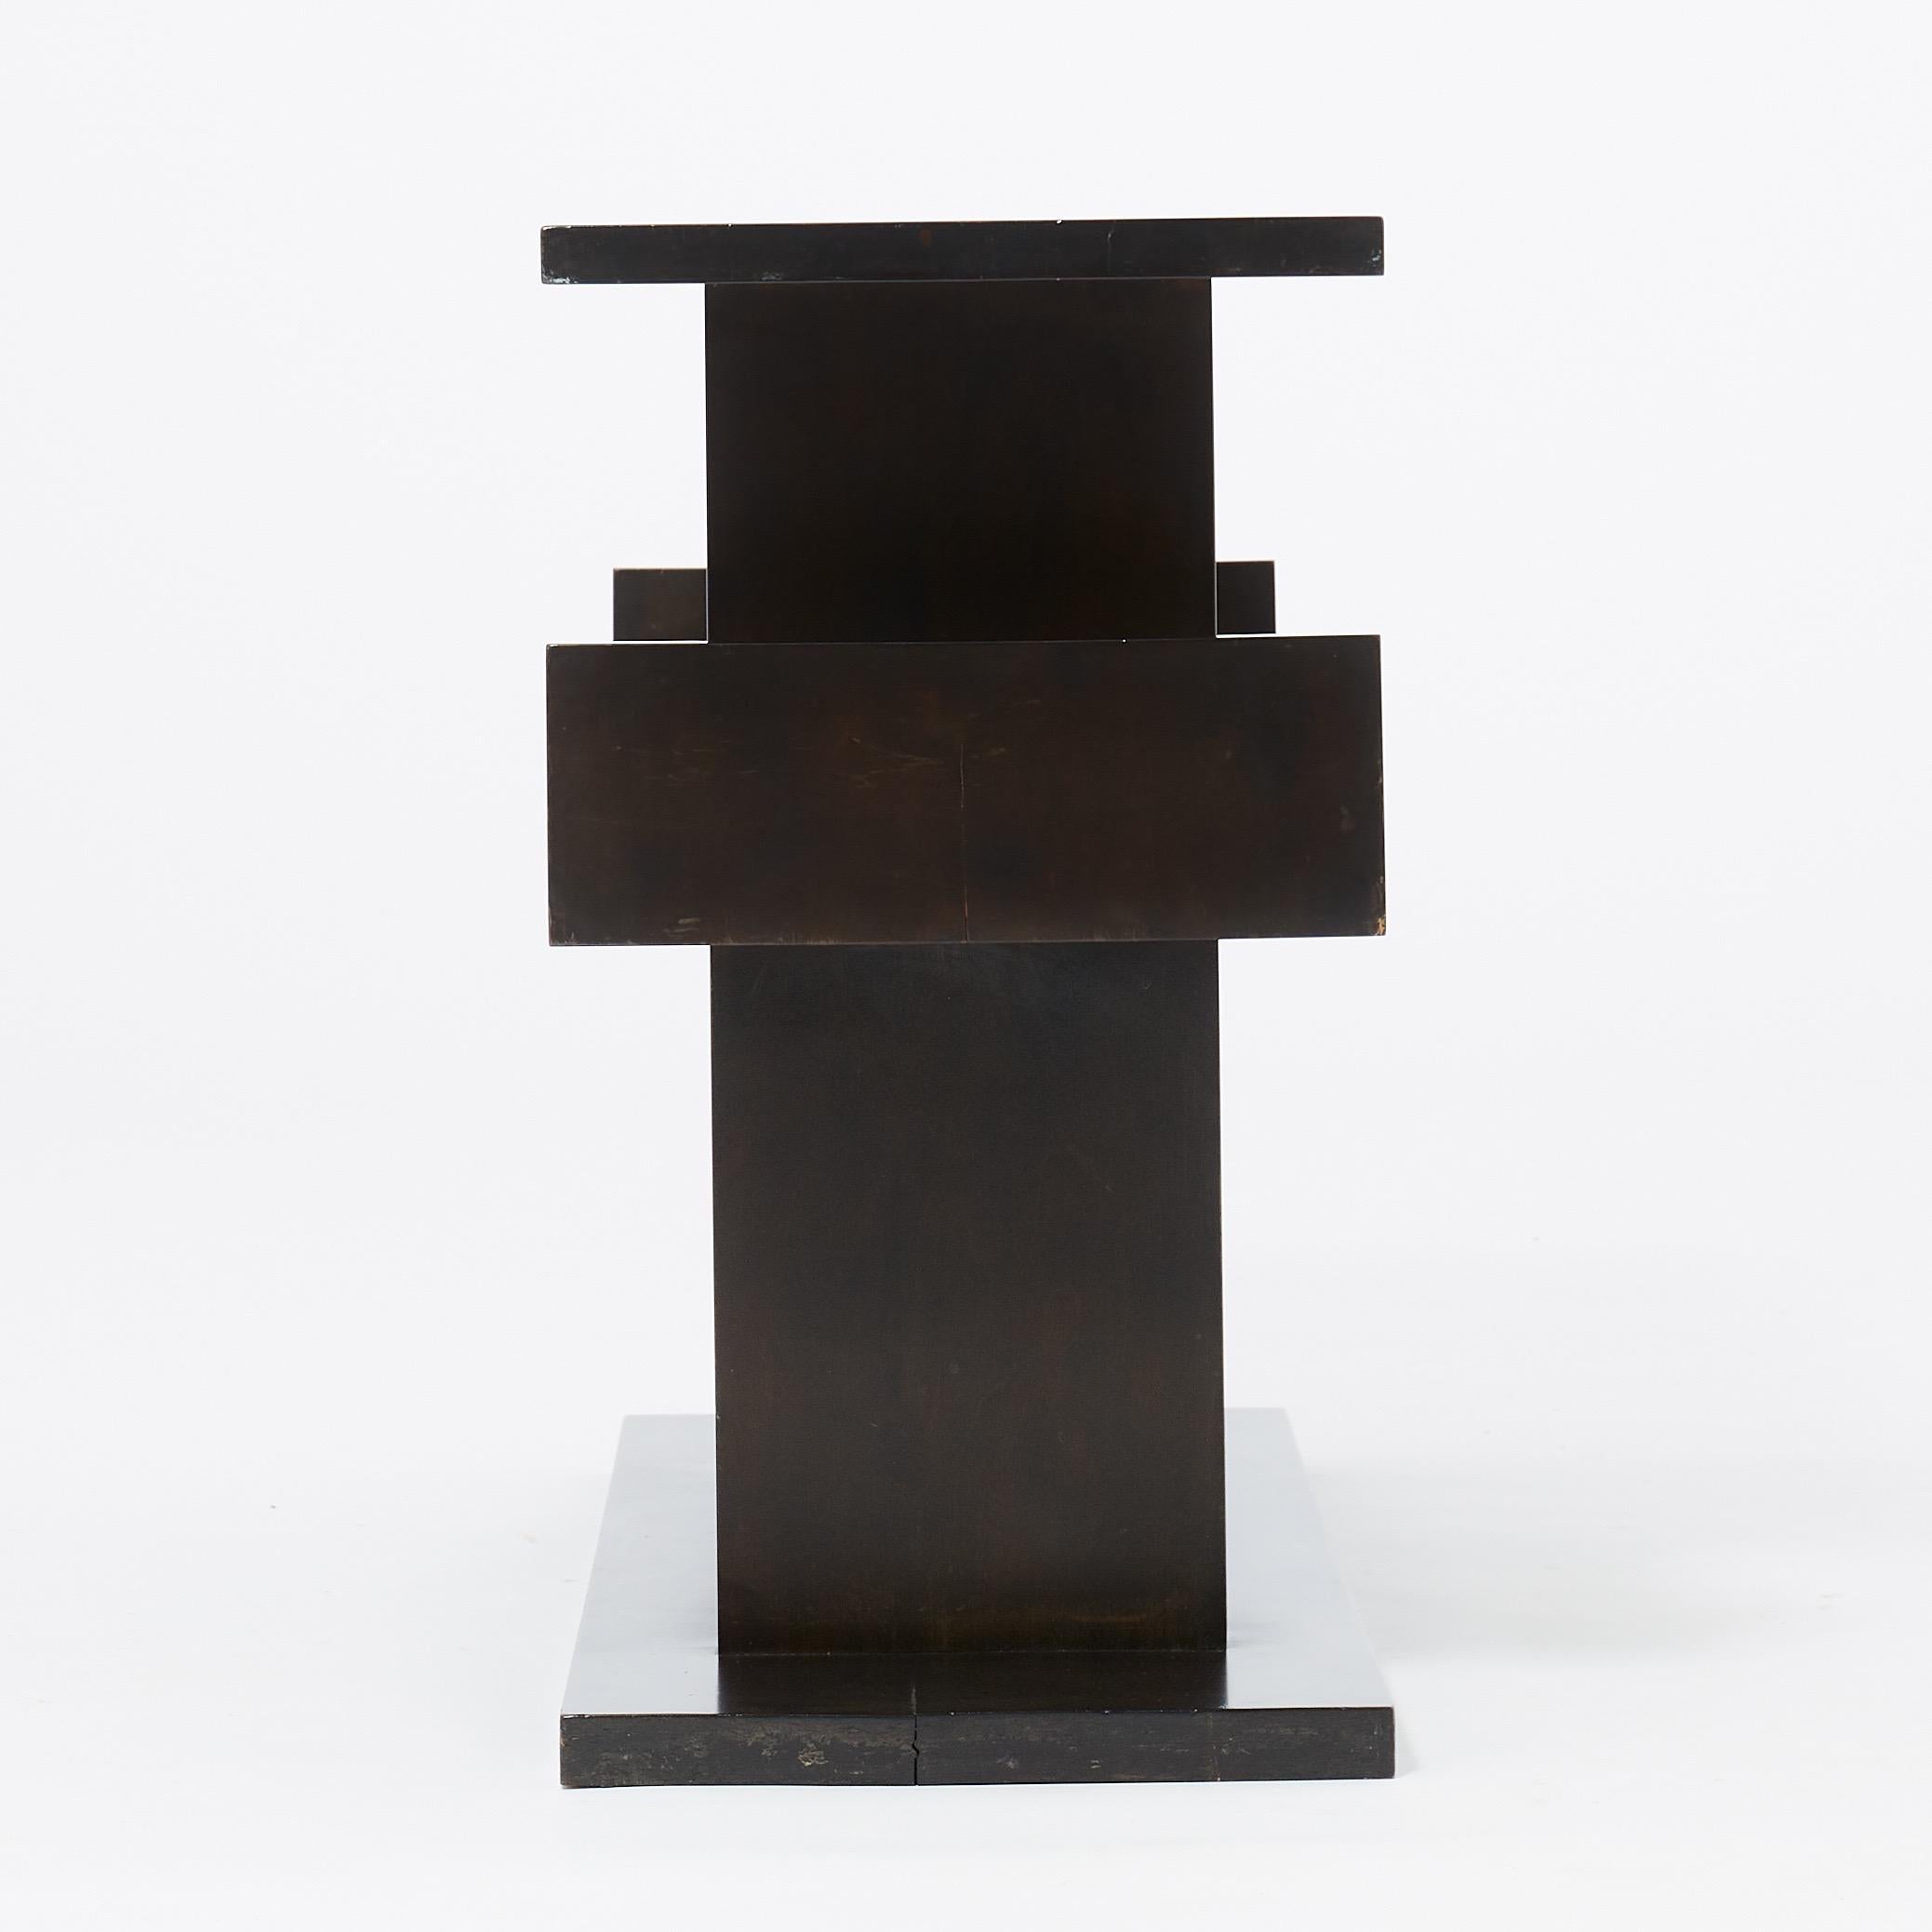 Axel Einar Hjorth (1888-1959). Bookshelf. “Typenko” Nordic Company 1930s. 

Plate marked R 36109 C 19962. Black-boned birch. L 110, W 35, H 65 cm.

The model was designed in 1931. The present bookshelf is a slightly shorter and probably